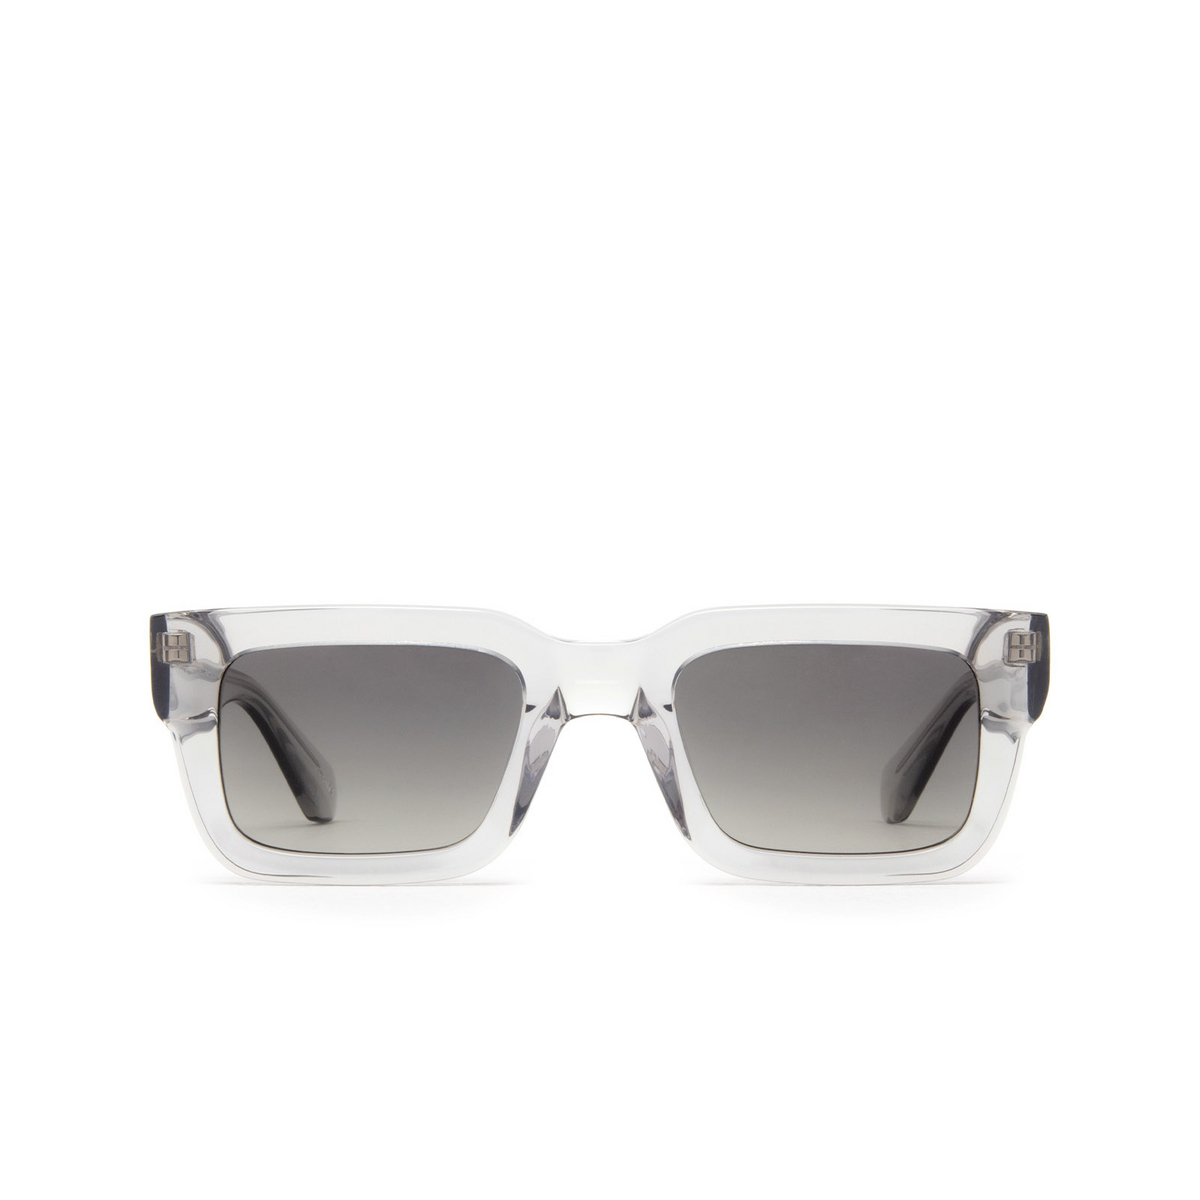 Chimi 05 Sunglasses GREY - front view